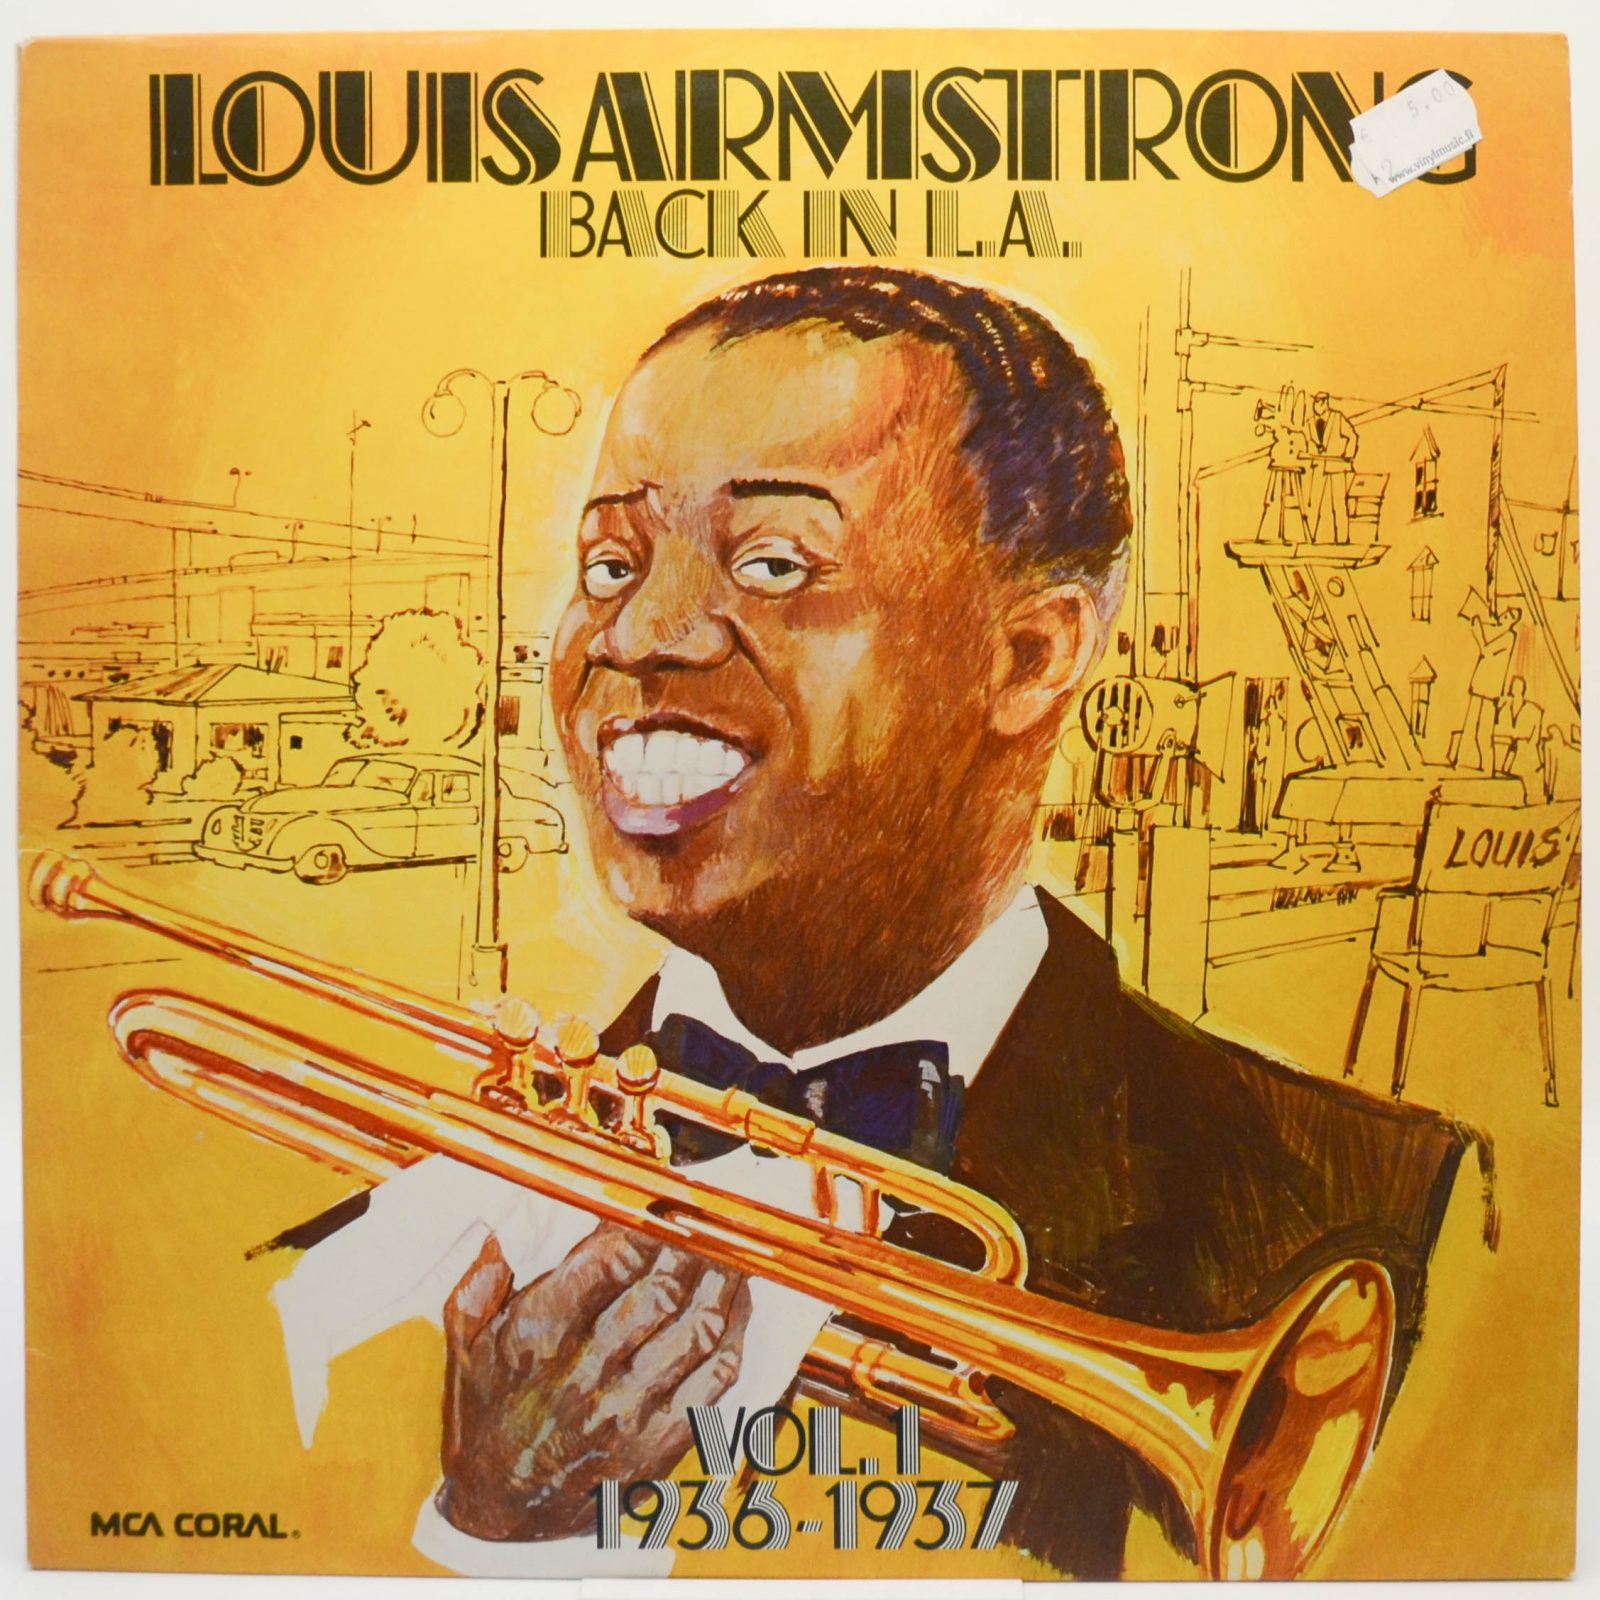 Louis Armstrong — Back In L.A. Vol.1 1936-1937, 1974